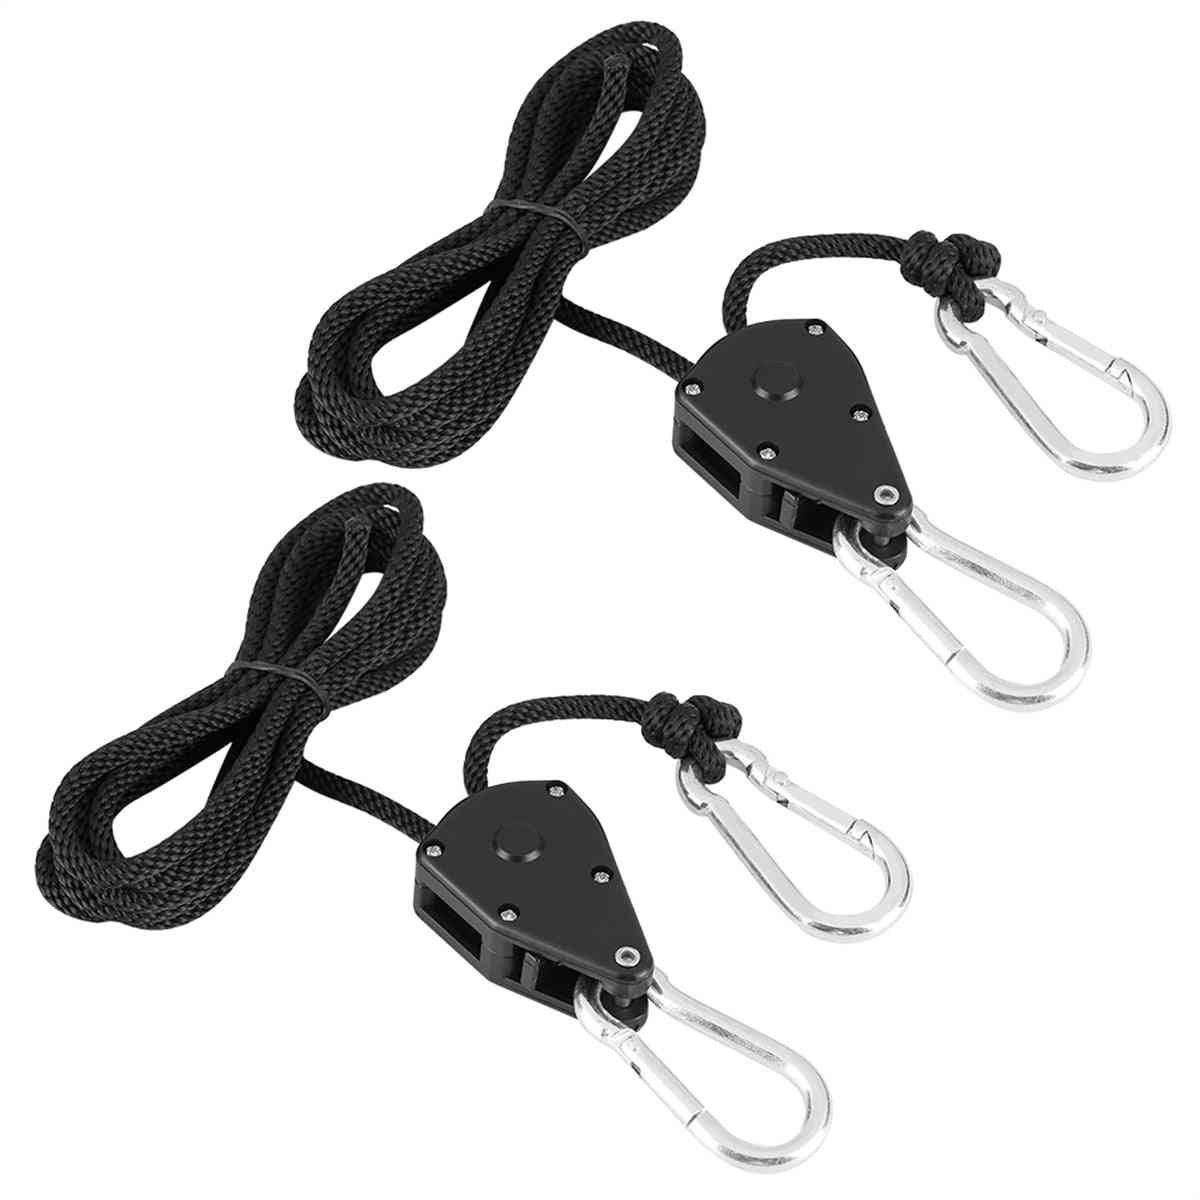 1/8inch Ratchet Hanger Pulley Rope For Hanging Tent Room